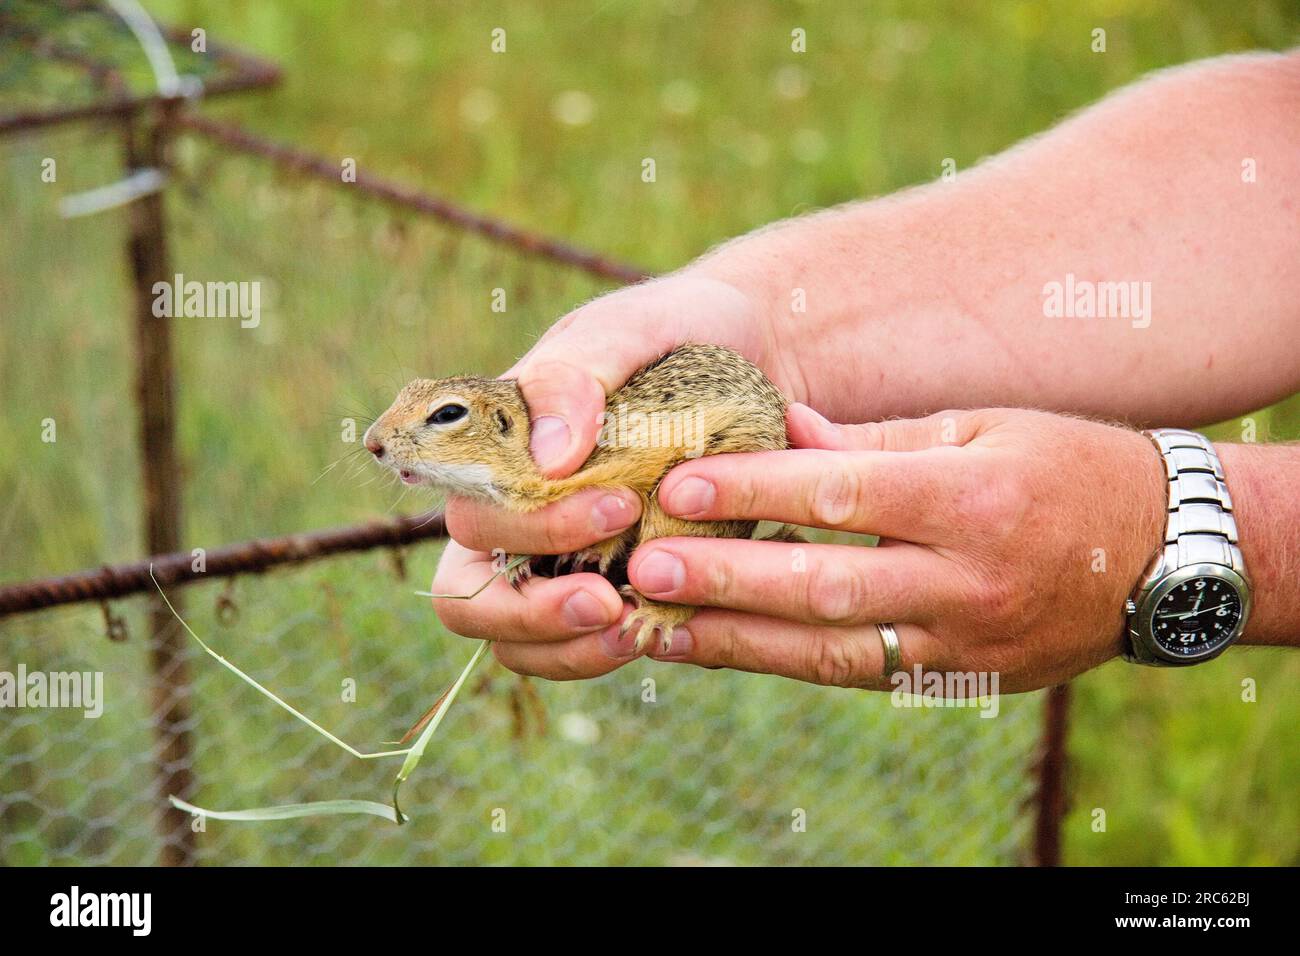 The European ground squirrel (Spermophilus citellus) during release into a new environment. male hand holding ground squirrel. Stock Photo